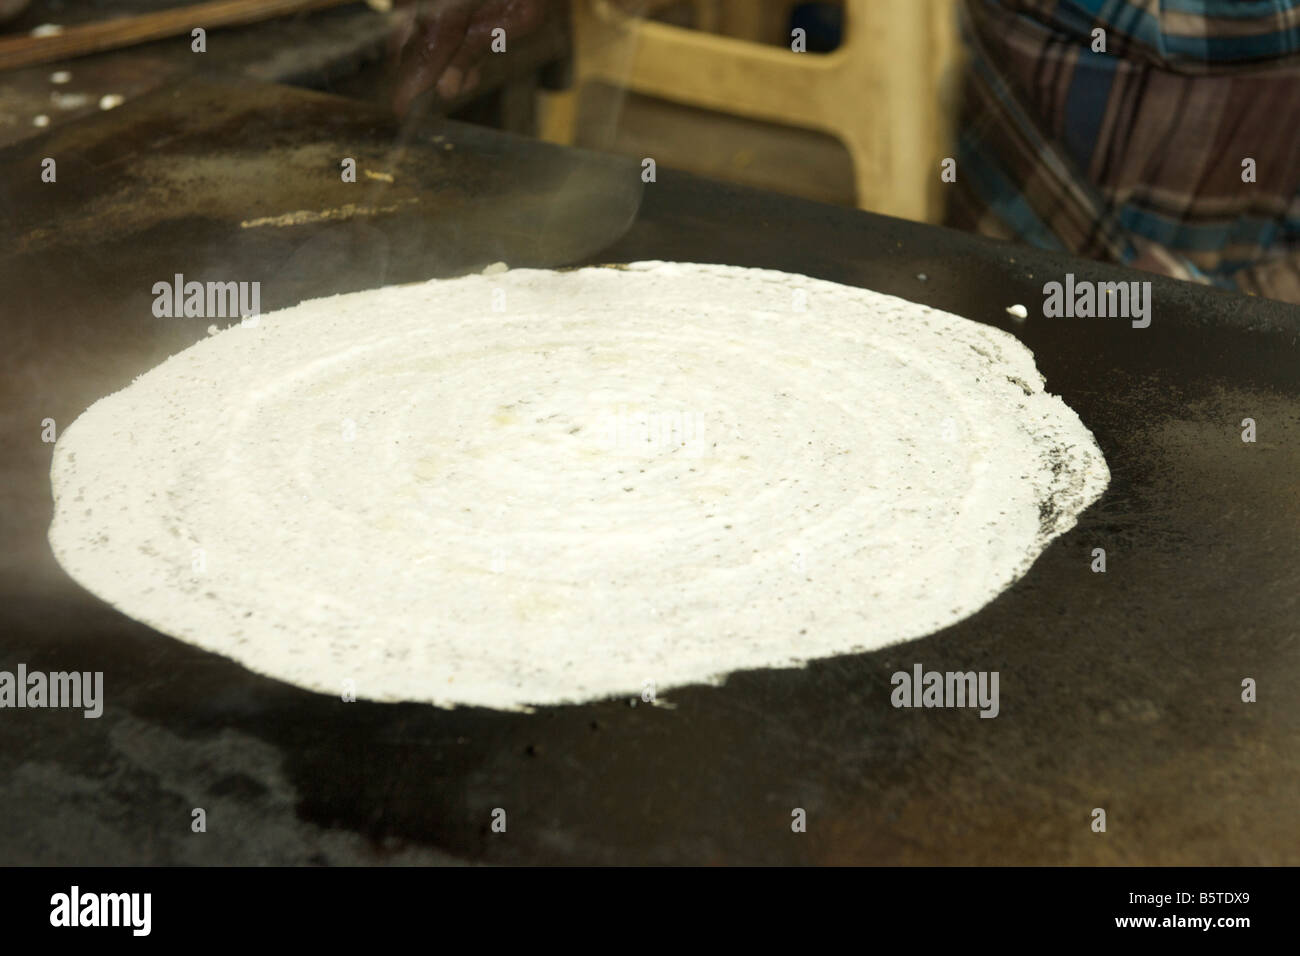 Dosa, a South Indian pancake being prepared at a roadside dhaba in Pondicherry India. Stock Photo